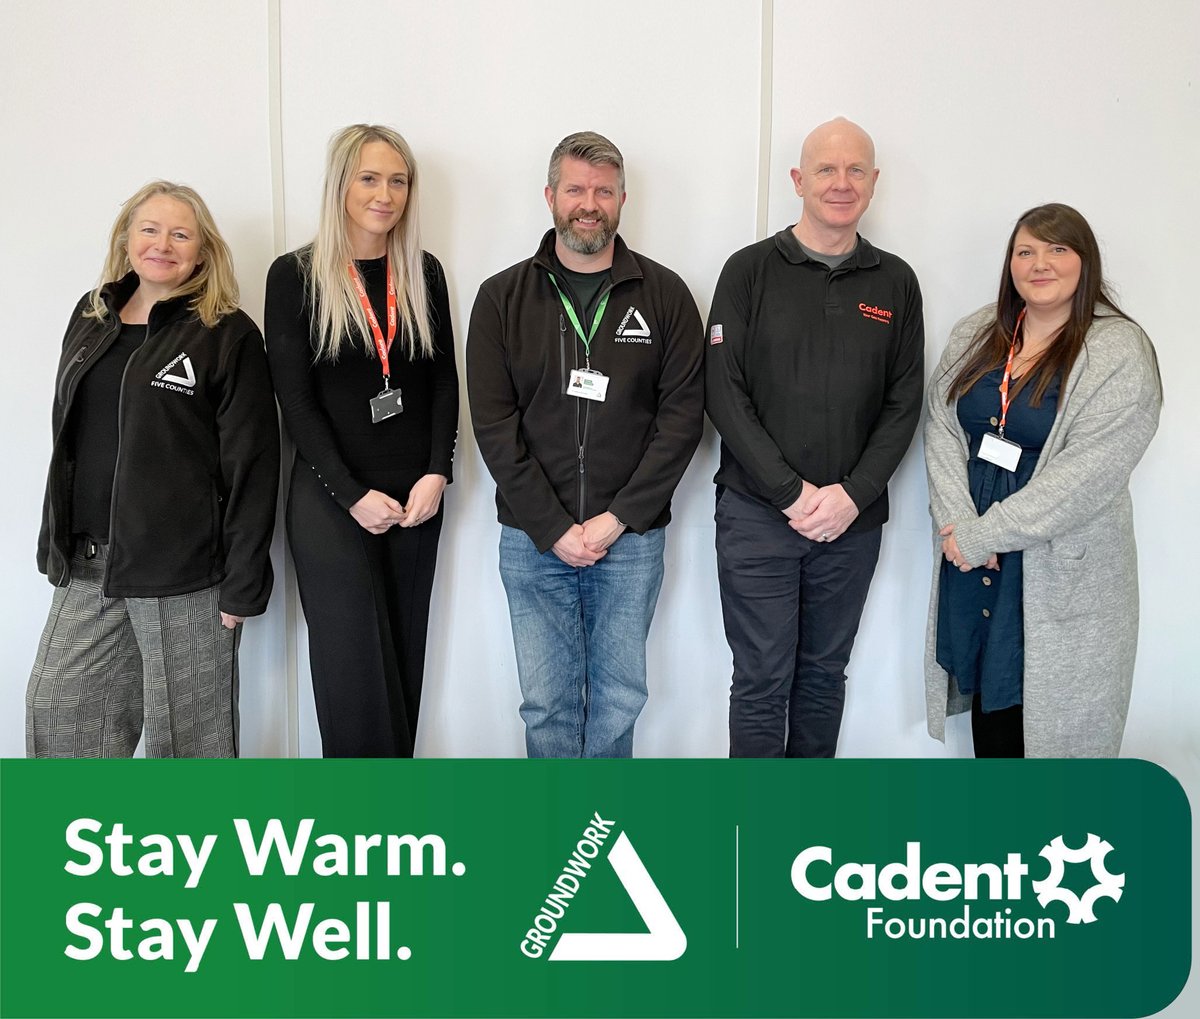 Recently our Green Doctor team met with @CadentFund who explained their 'beyond the meter' support, including gas safety checks, repairs and more.

We help people who are struggling with their bills to Stay Warm, Stay Well.

Find out more 👇
ow.ly/8QN350RqCnW

@groundworkuk